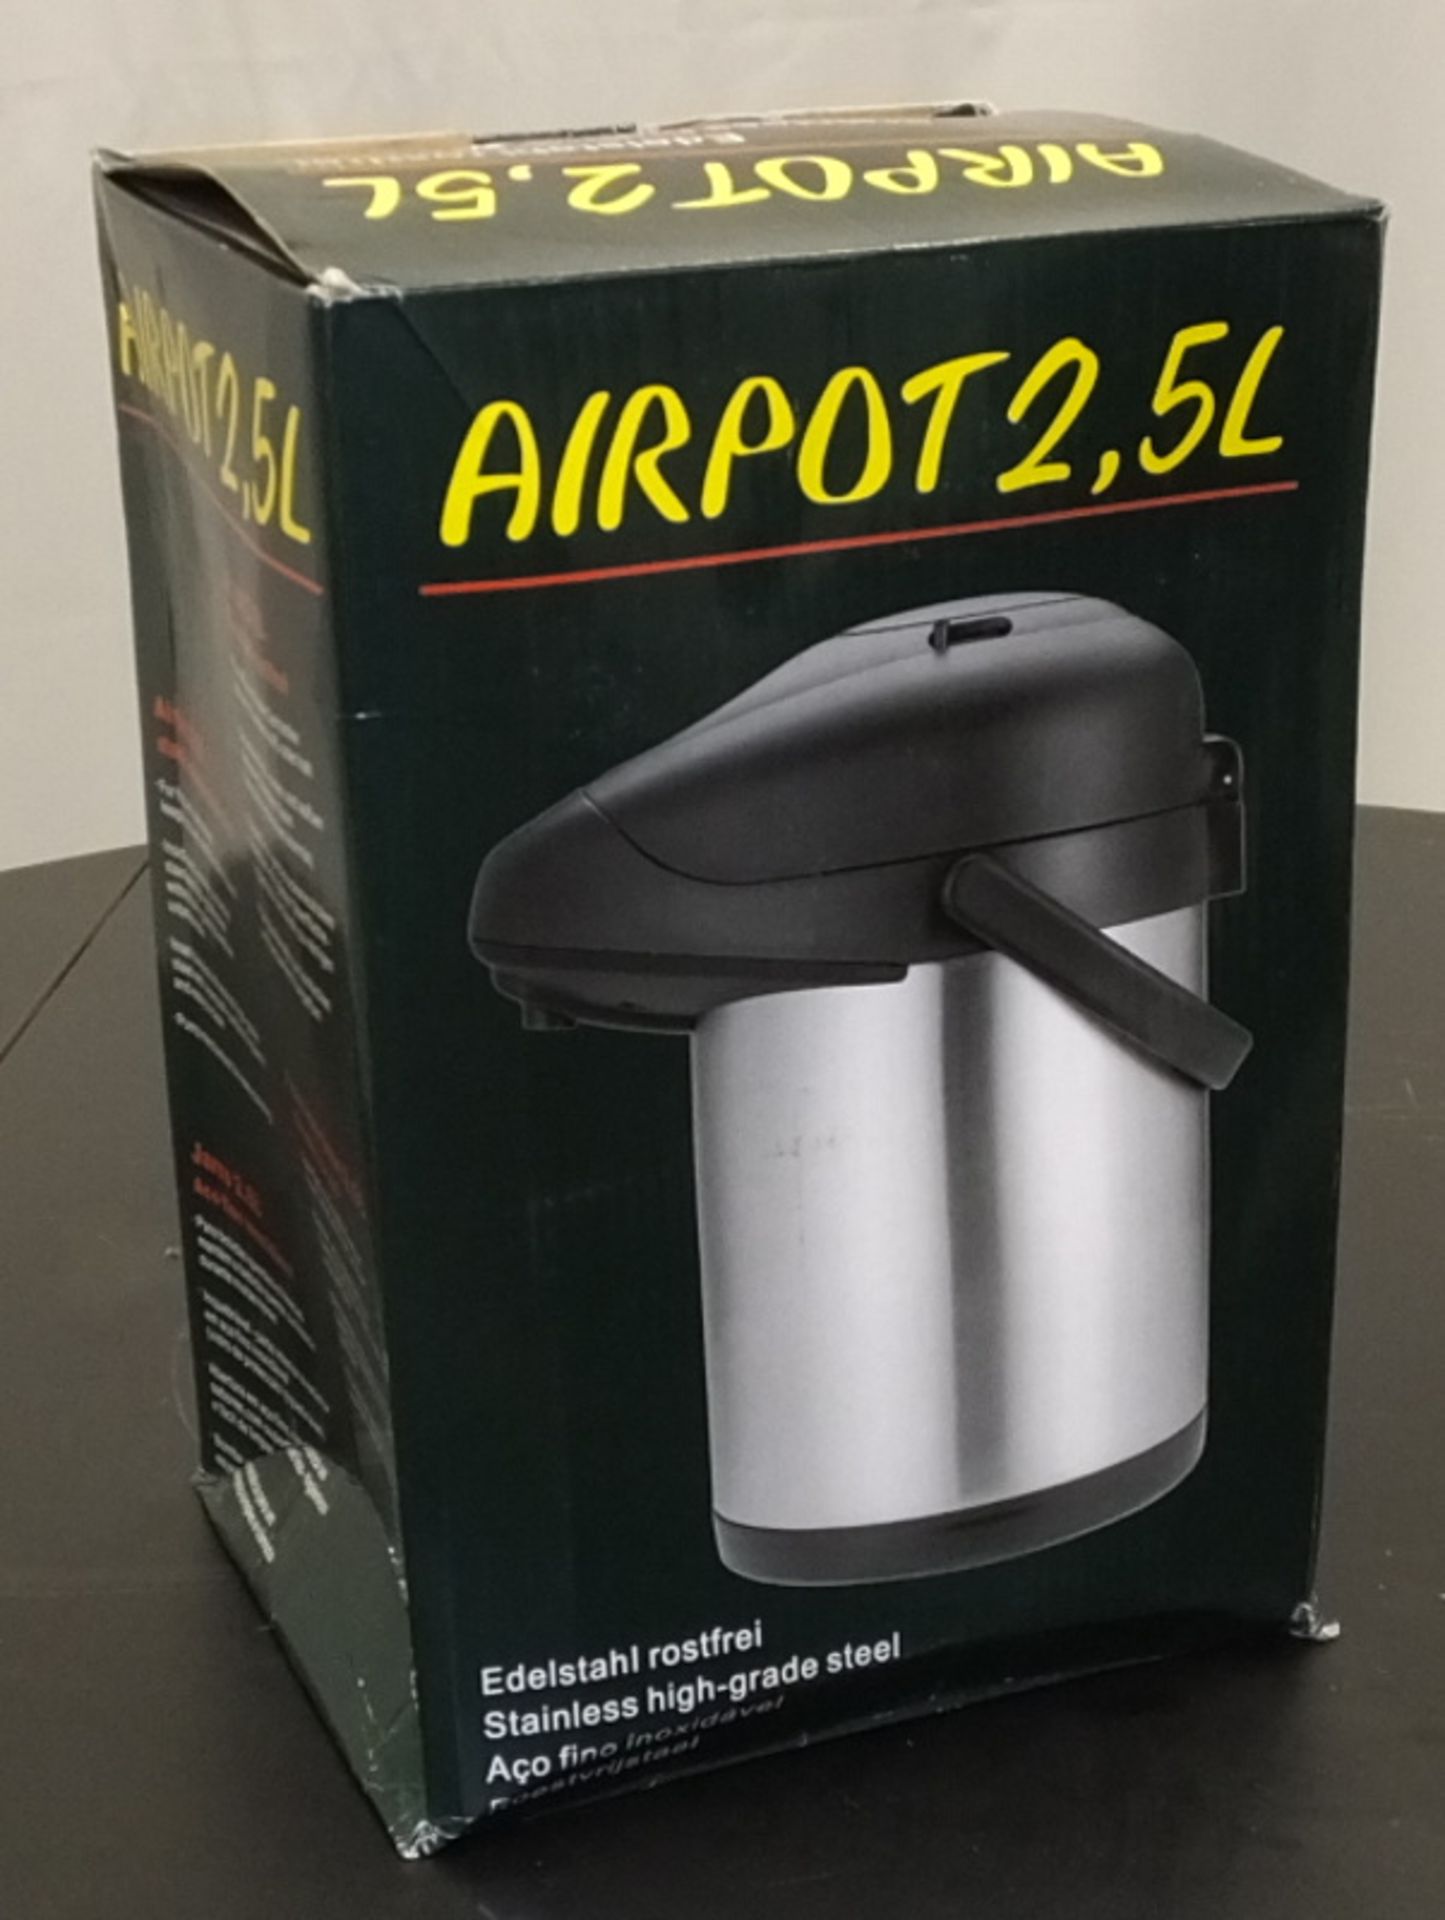 24x 2.5L Airpots - stainless steel - Image 3 of 3